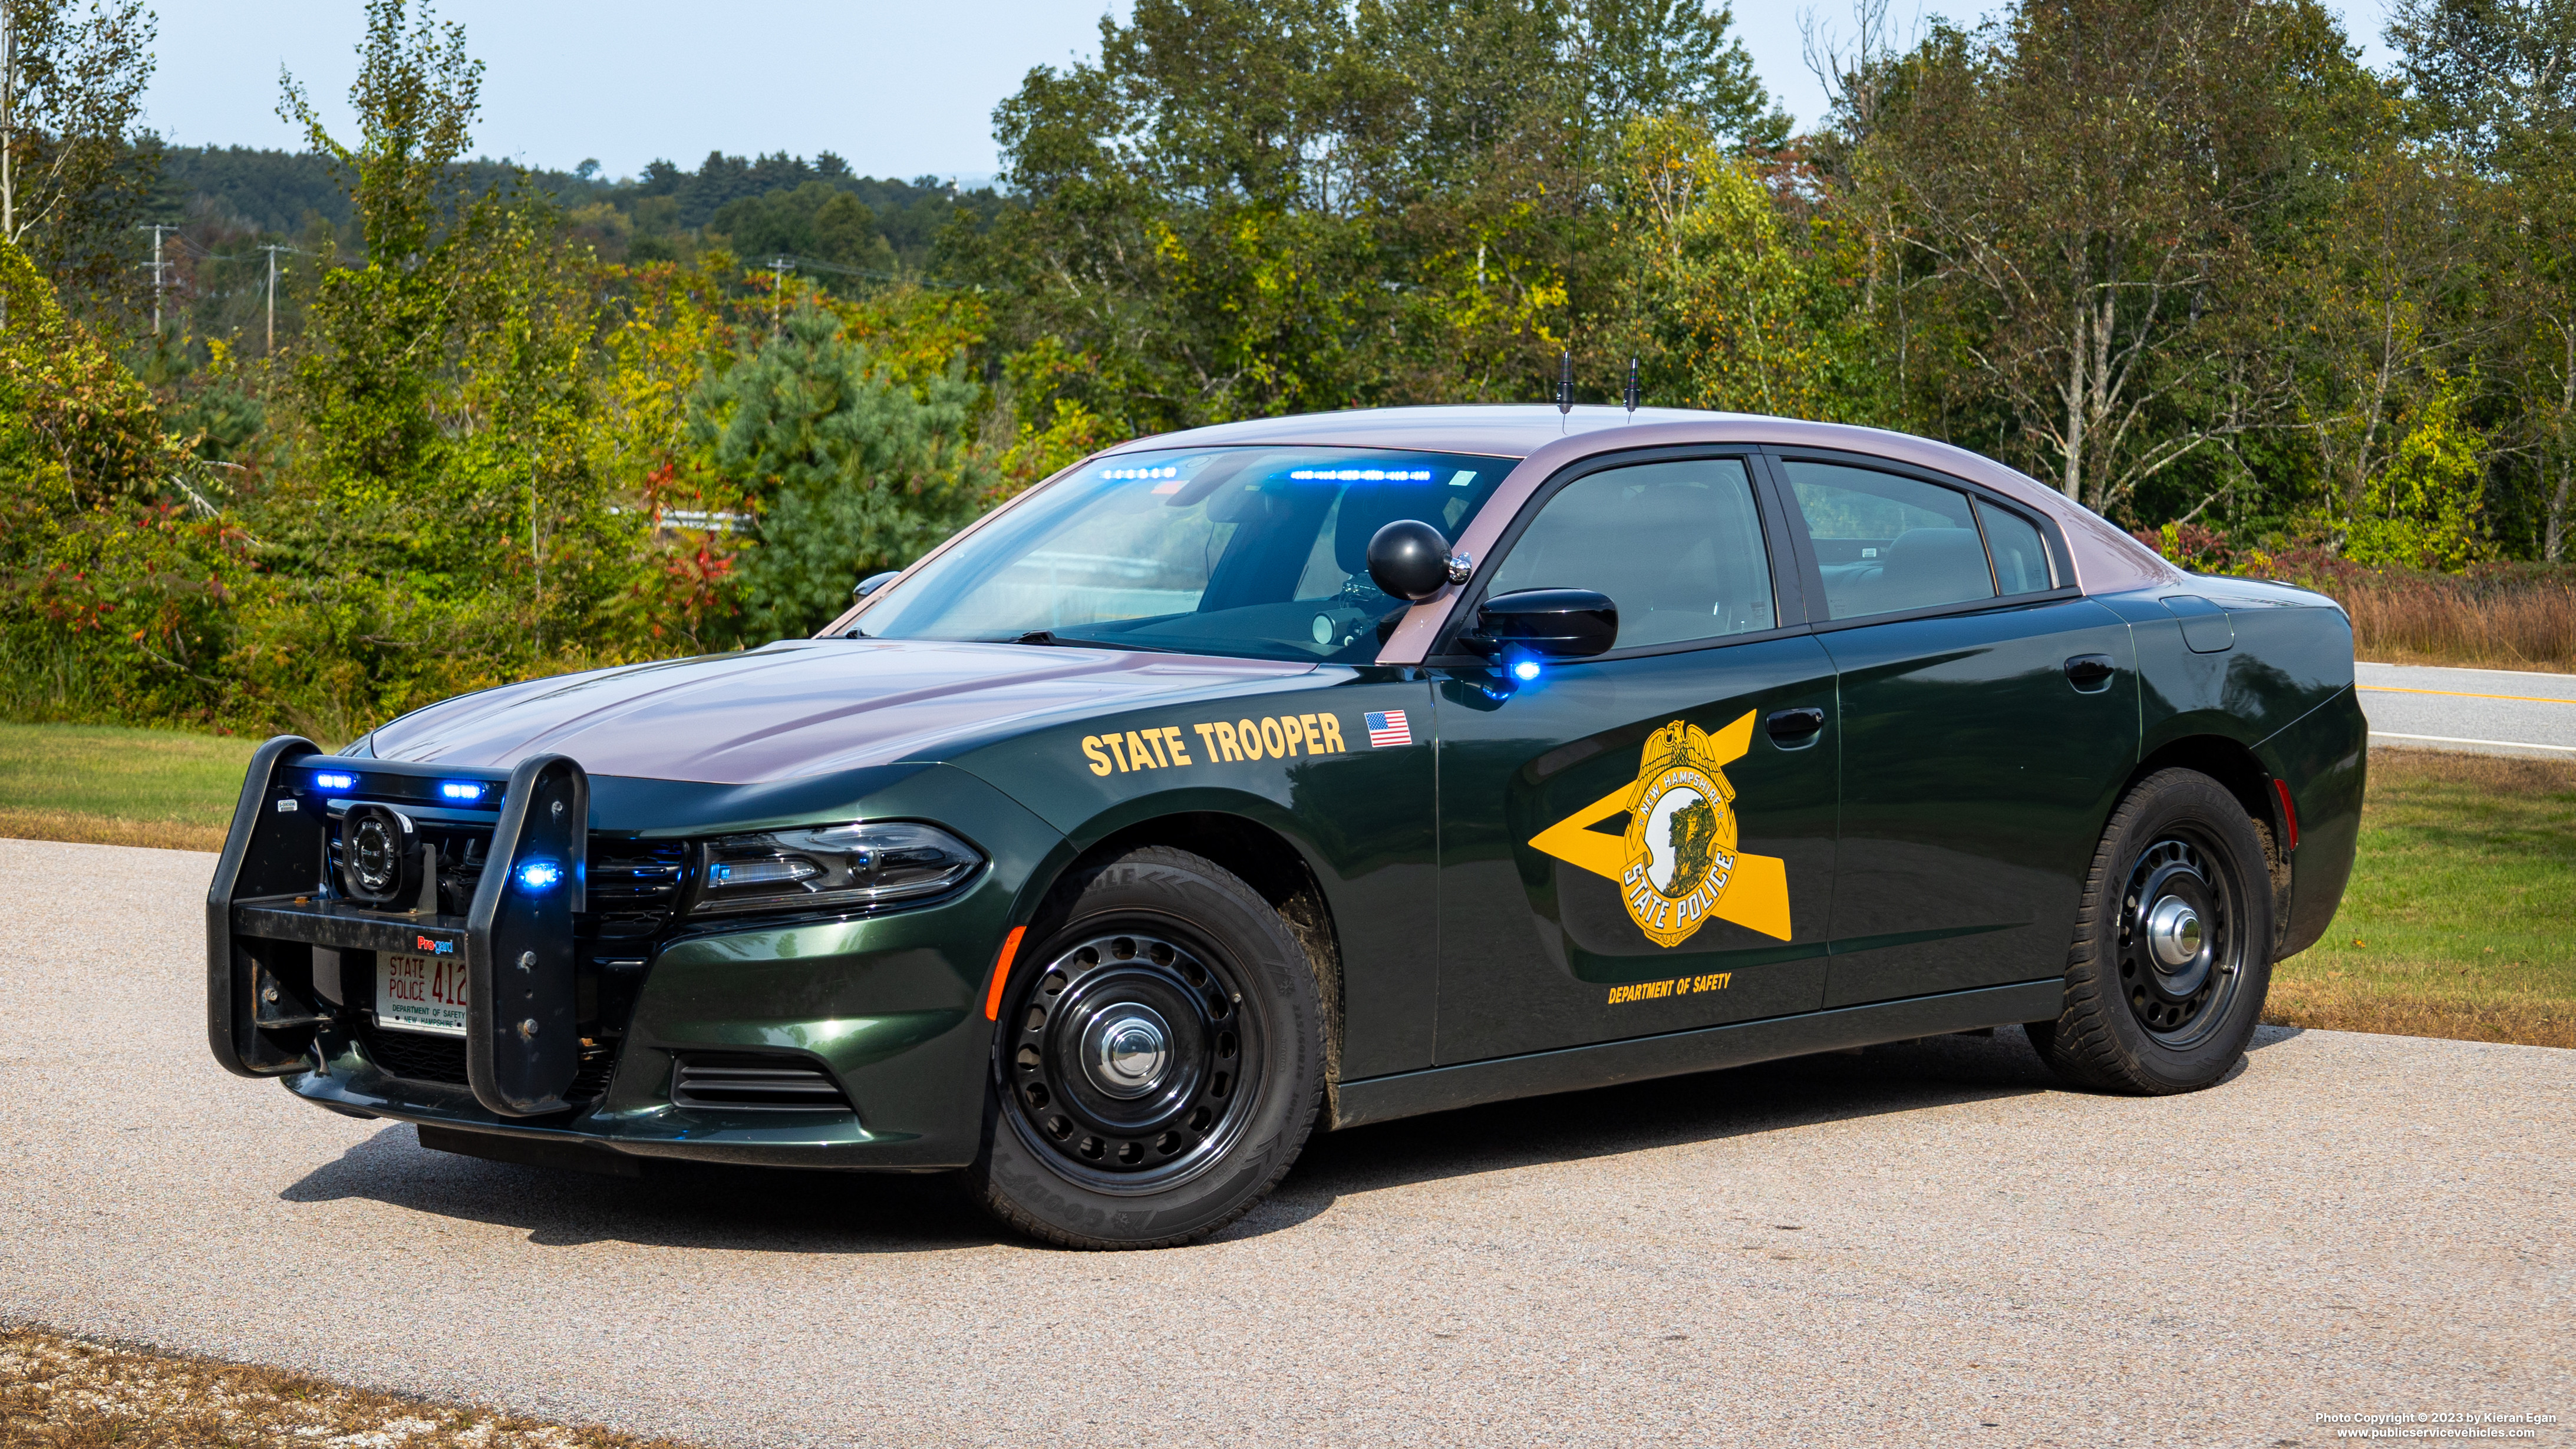 A photo  of New Hampshire State Police
            Cruiser 412, a 2020 Dodge Charger             taken by Kieran Egan